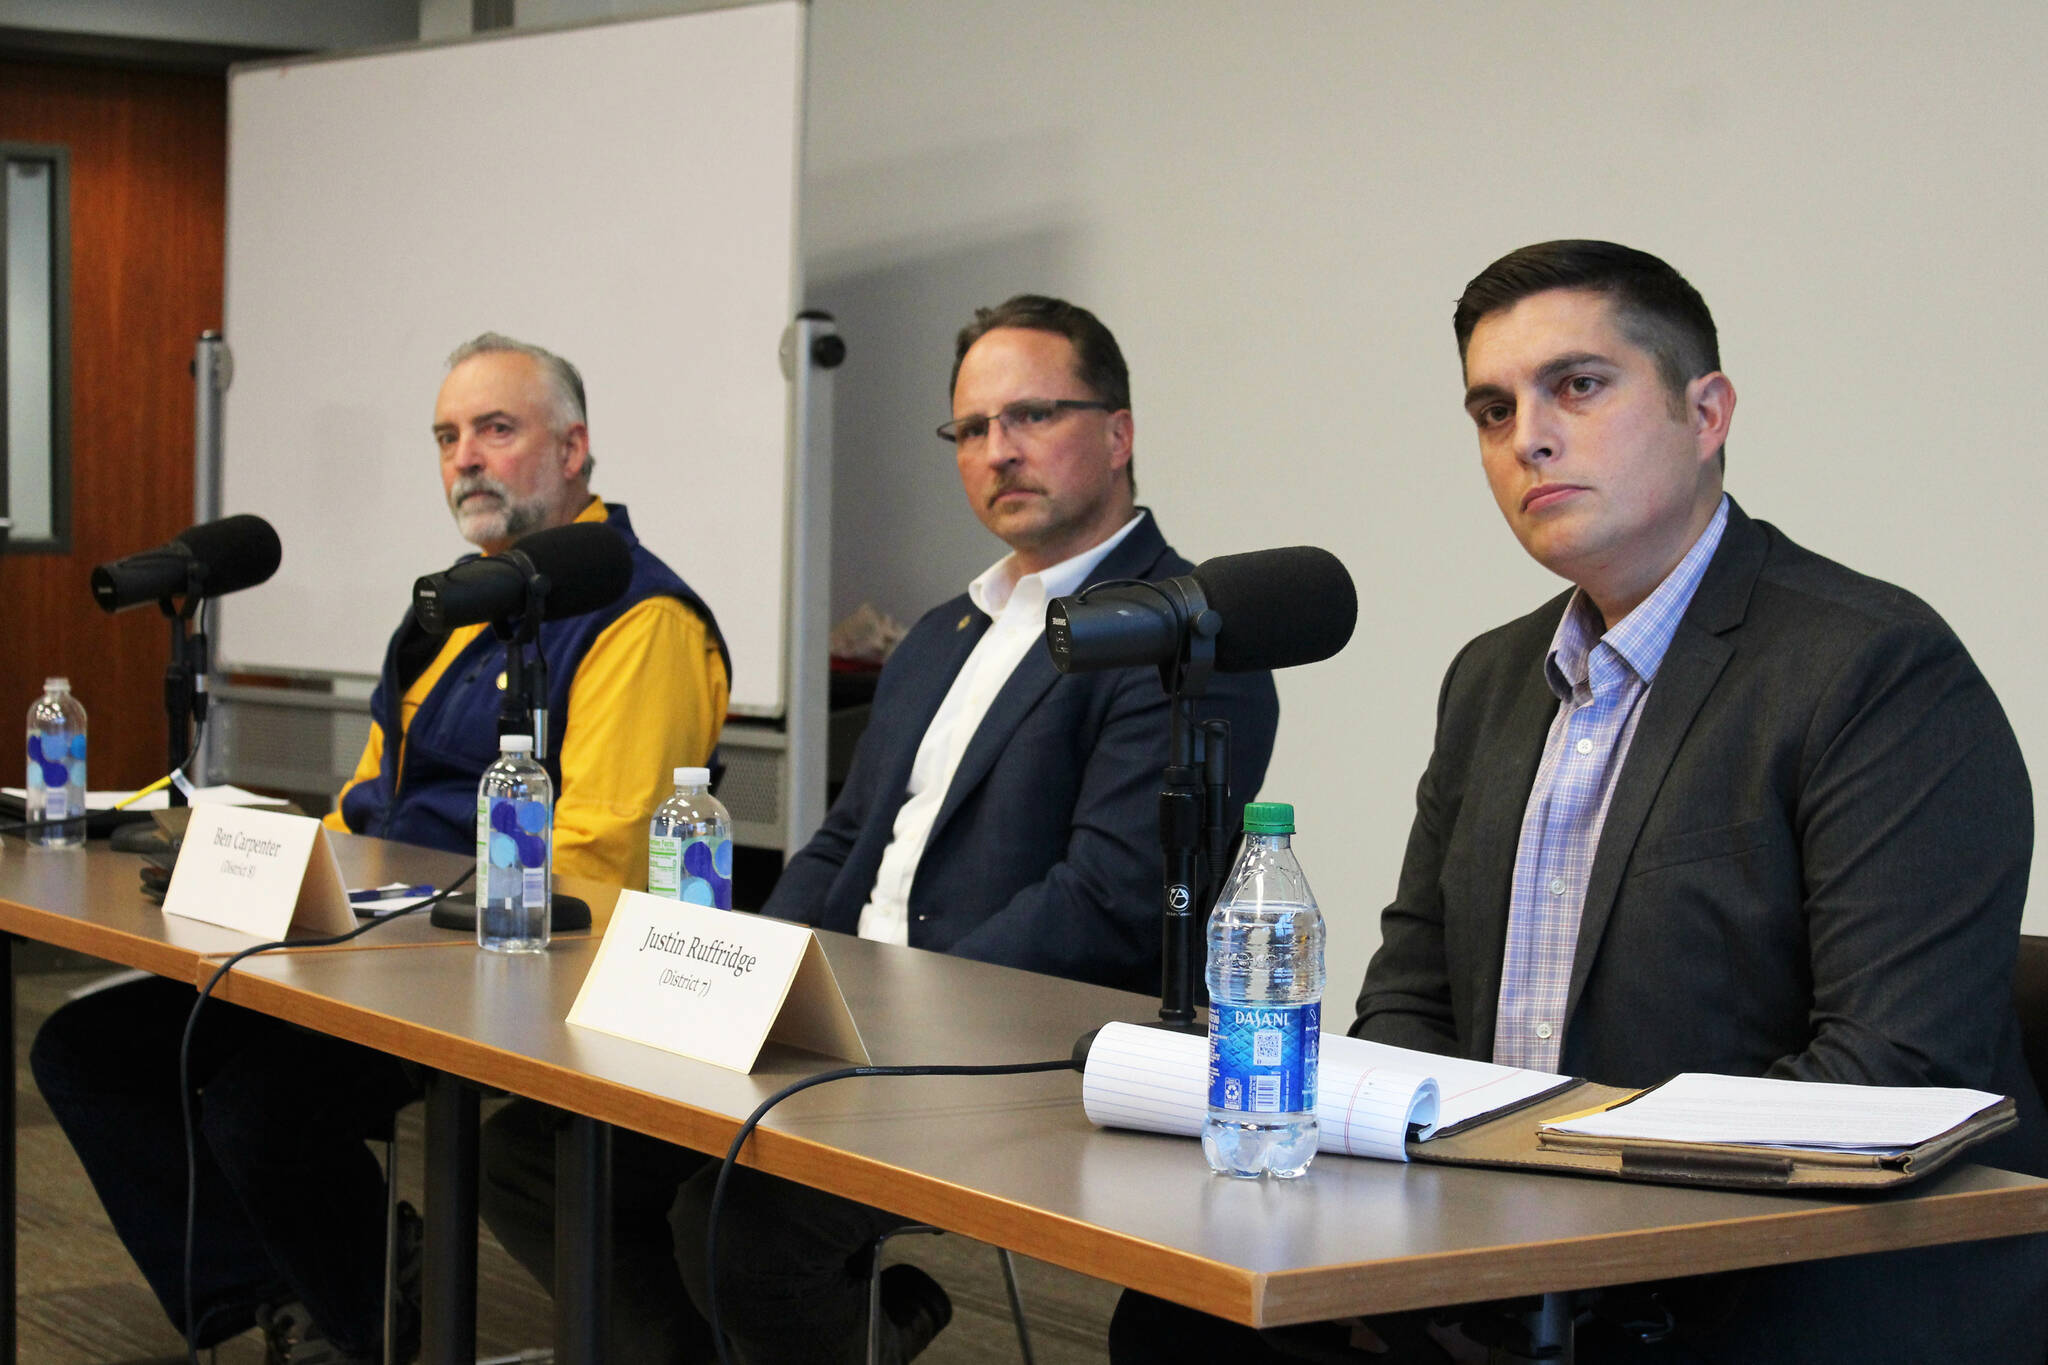 From left, Alaska State House candidates Ron Gillham, Ben Carpenter and Justin Ruffridge participate in a candidate forum on Monday, Oct. 10, 2022, in Soldotna, Alaska. (Ashlyn O’Hara/Peninsula Clarion)